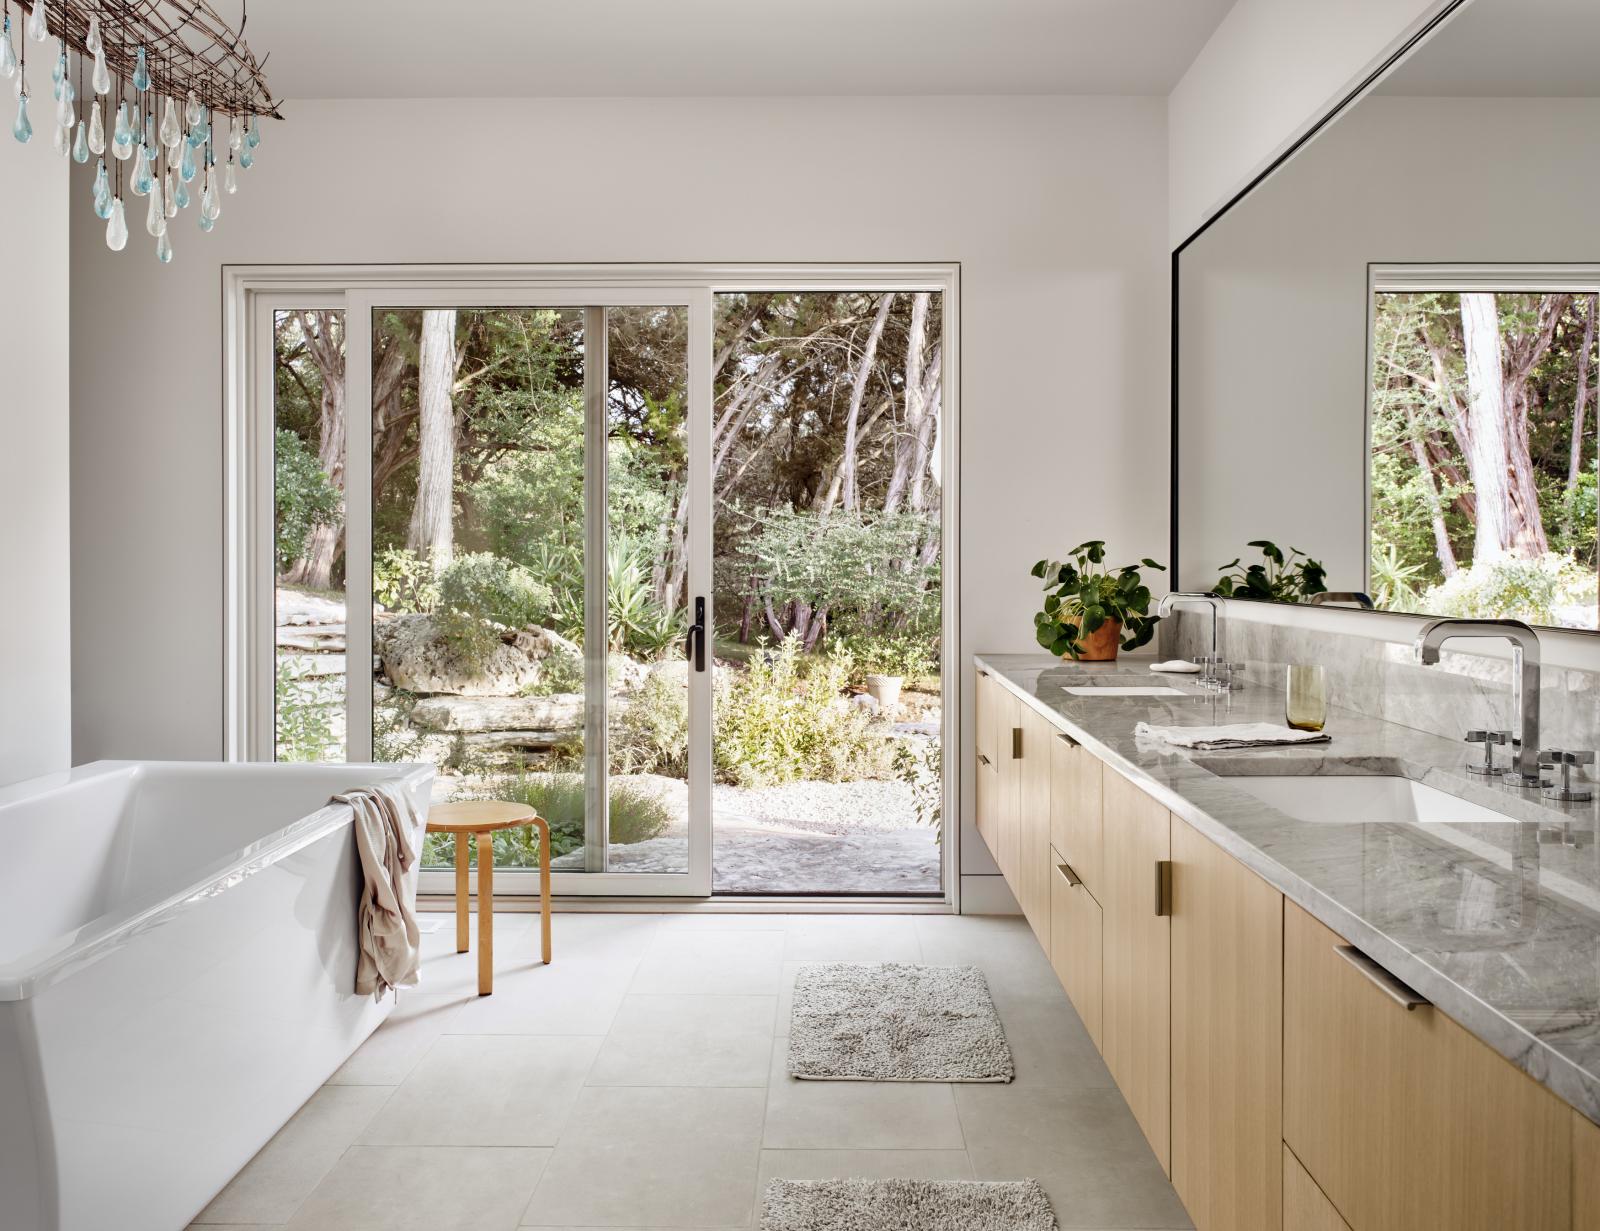 Interior master bathroom connects through a sliding glass door to outdoor landscape 